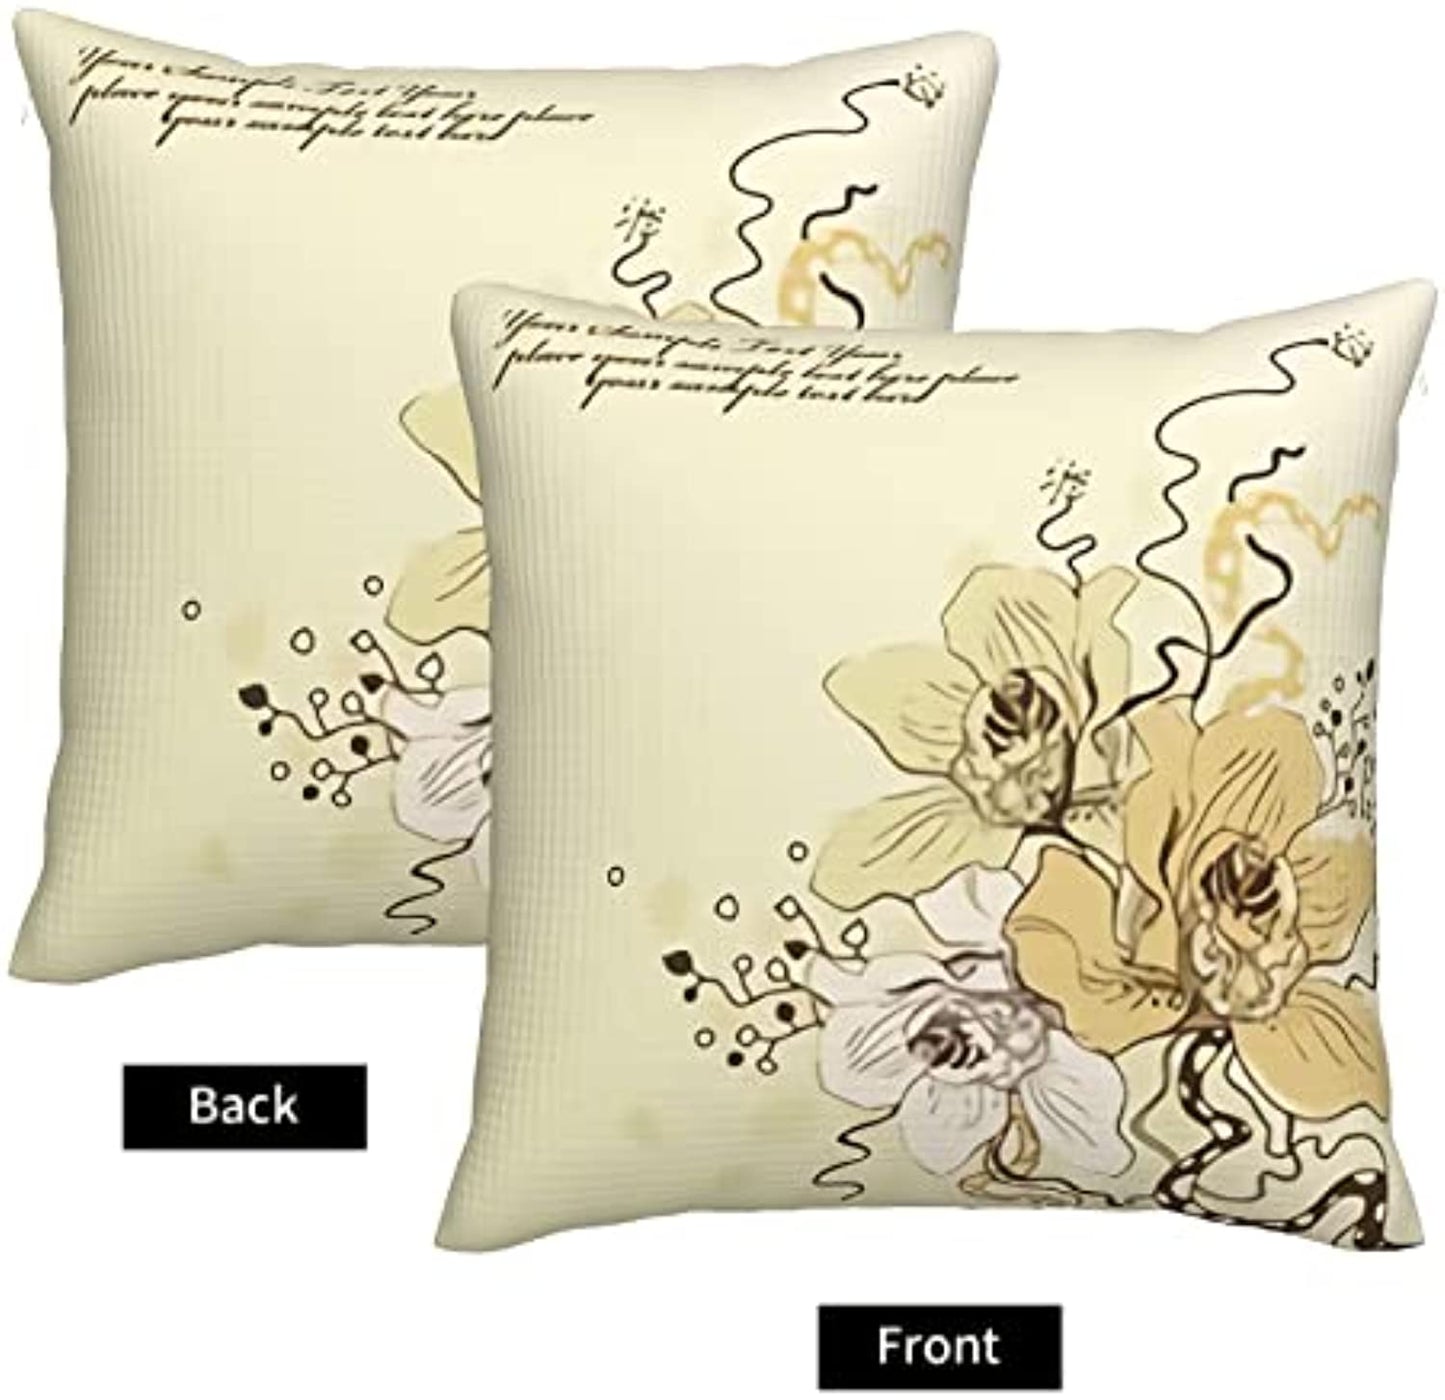 Blooming Orchids Floral Pillow Covers Beautiful Bouquet Flower Throw Pillow Covers Decorative Pillow Cases for Couch Sofa Bedroom Chair Car